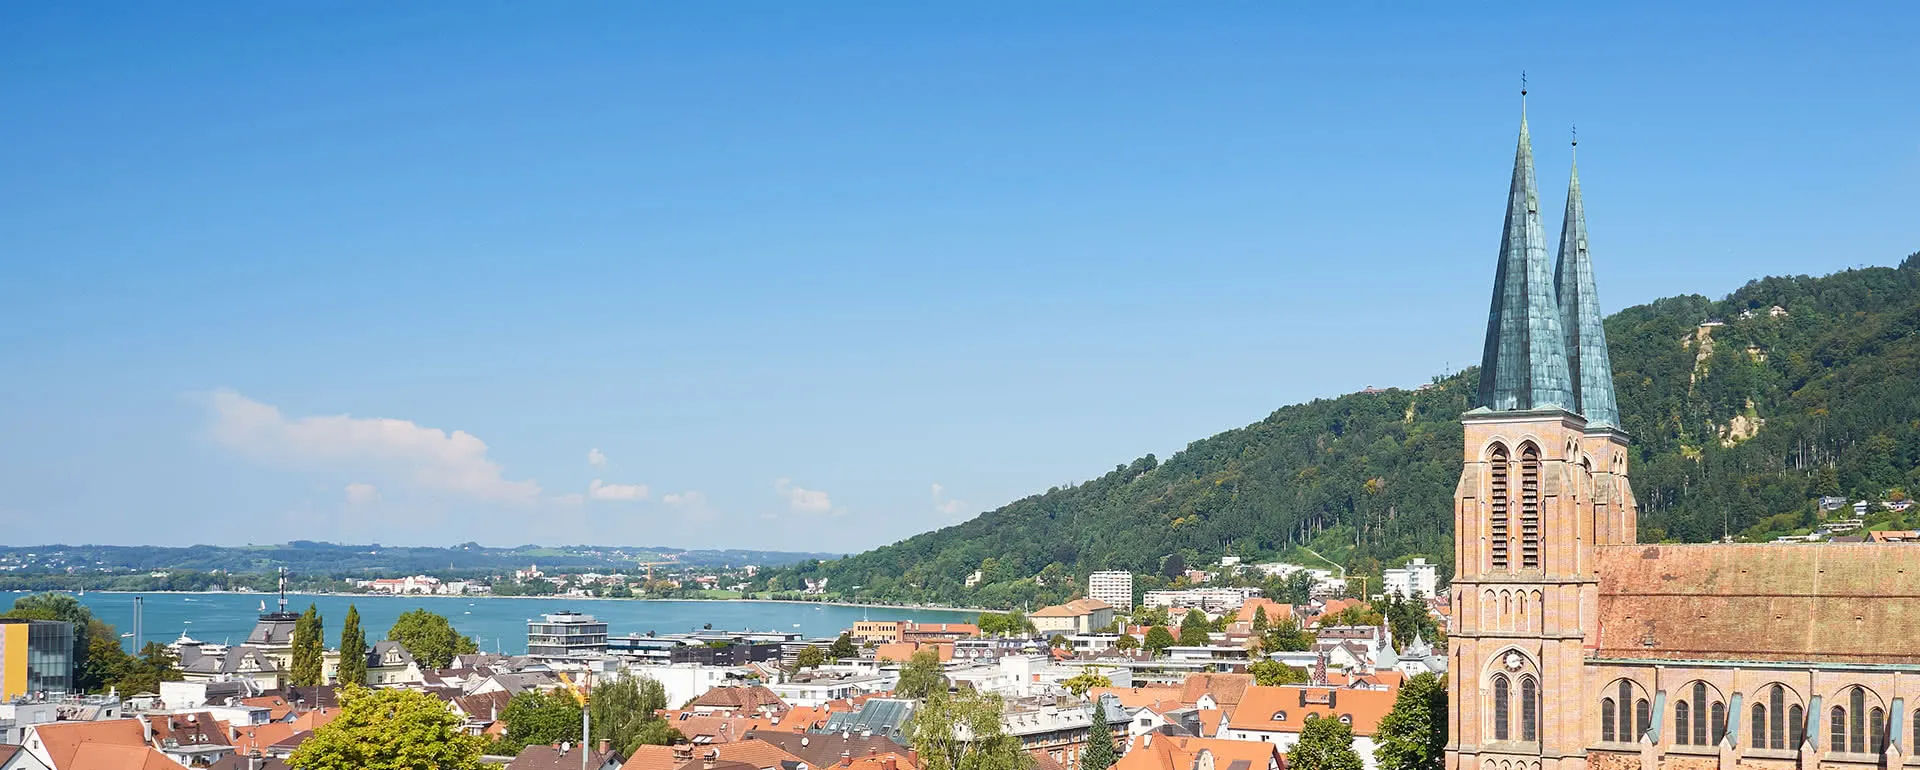 Bregenz - the destination with youth hostels